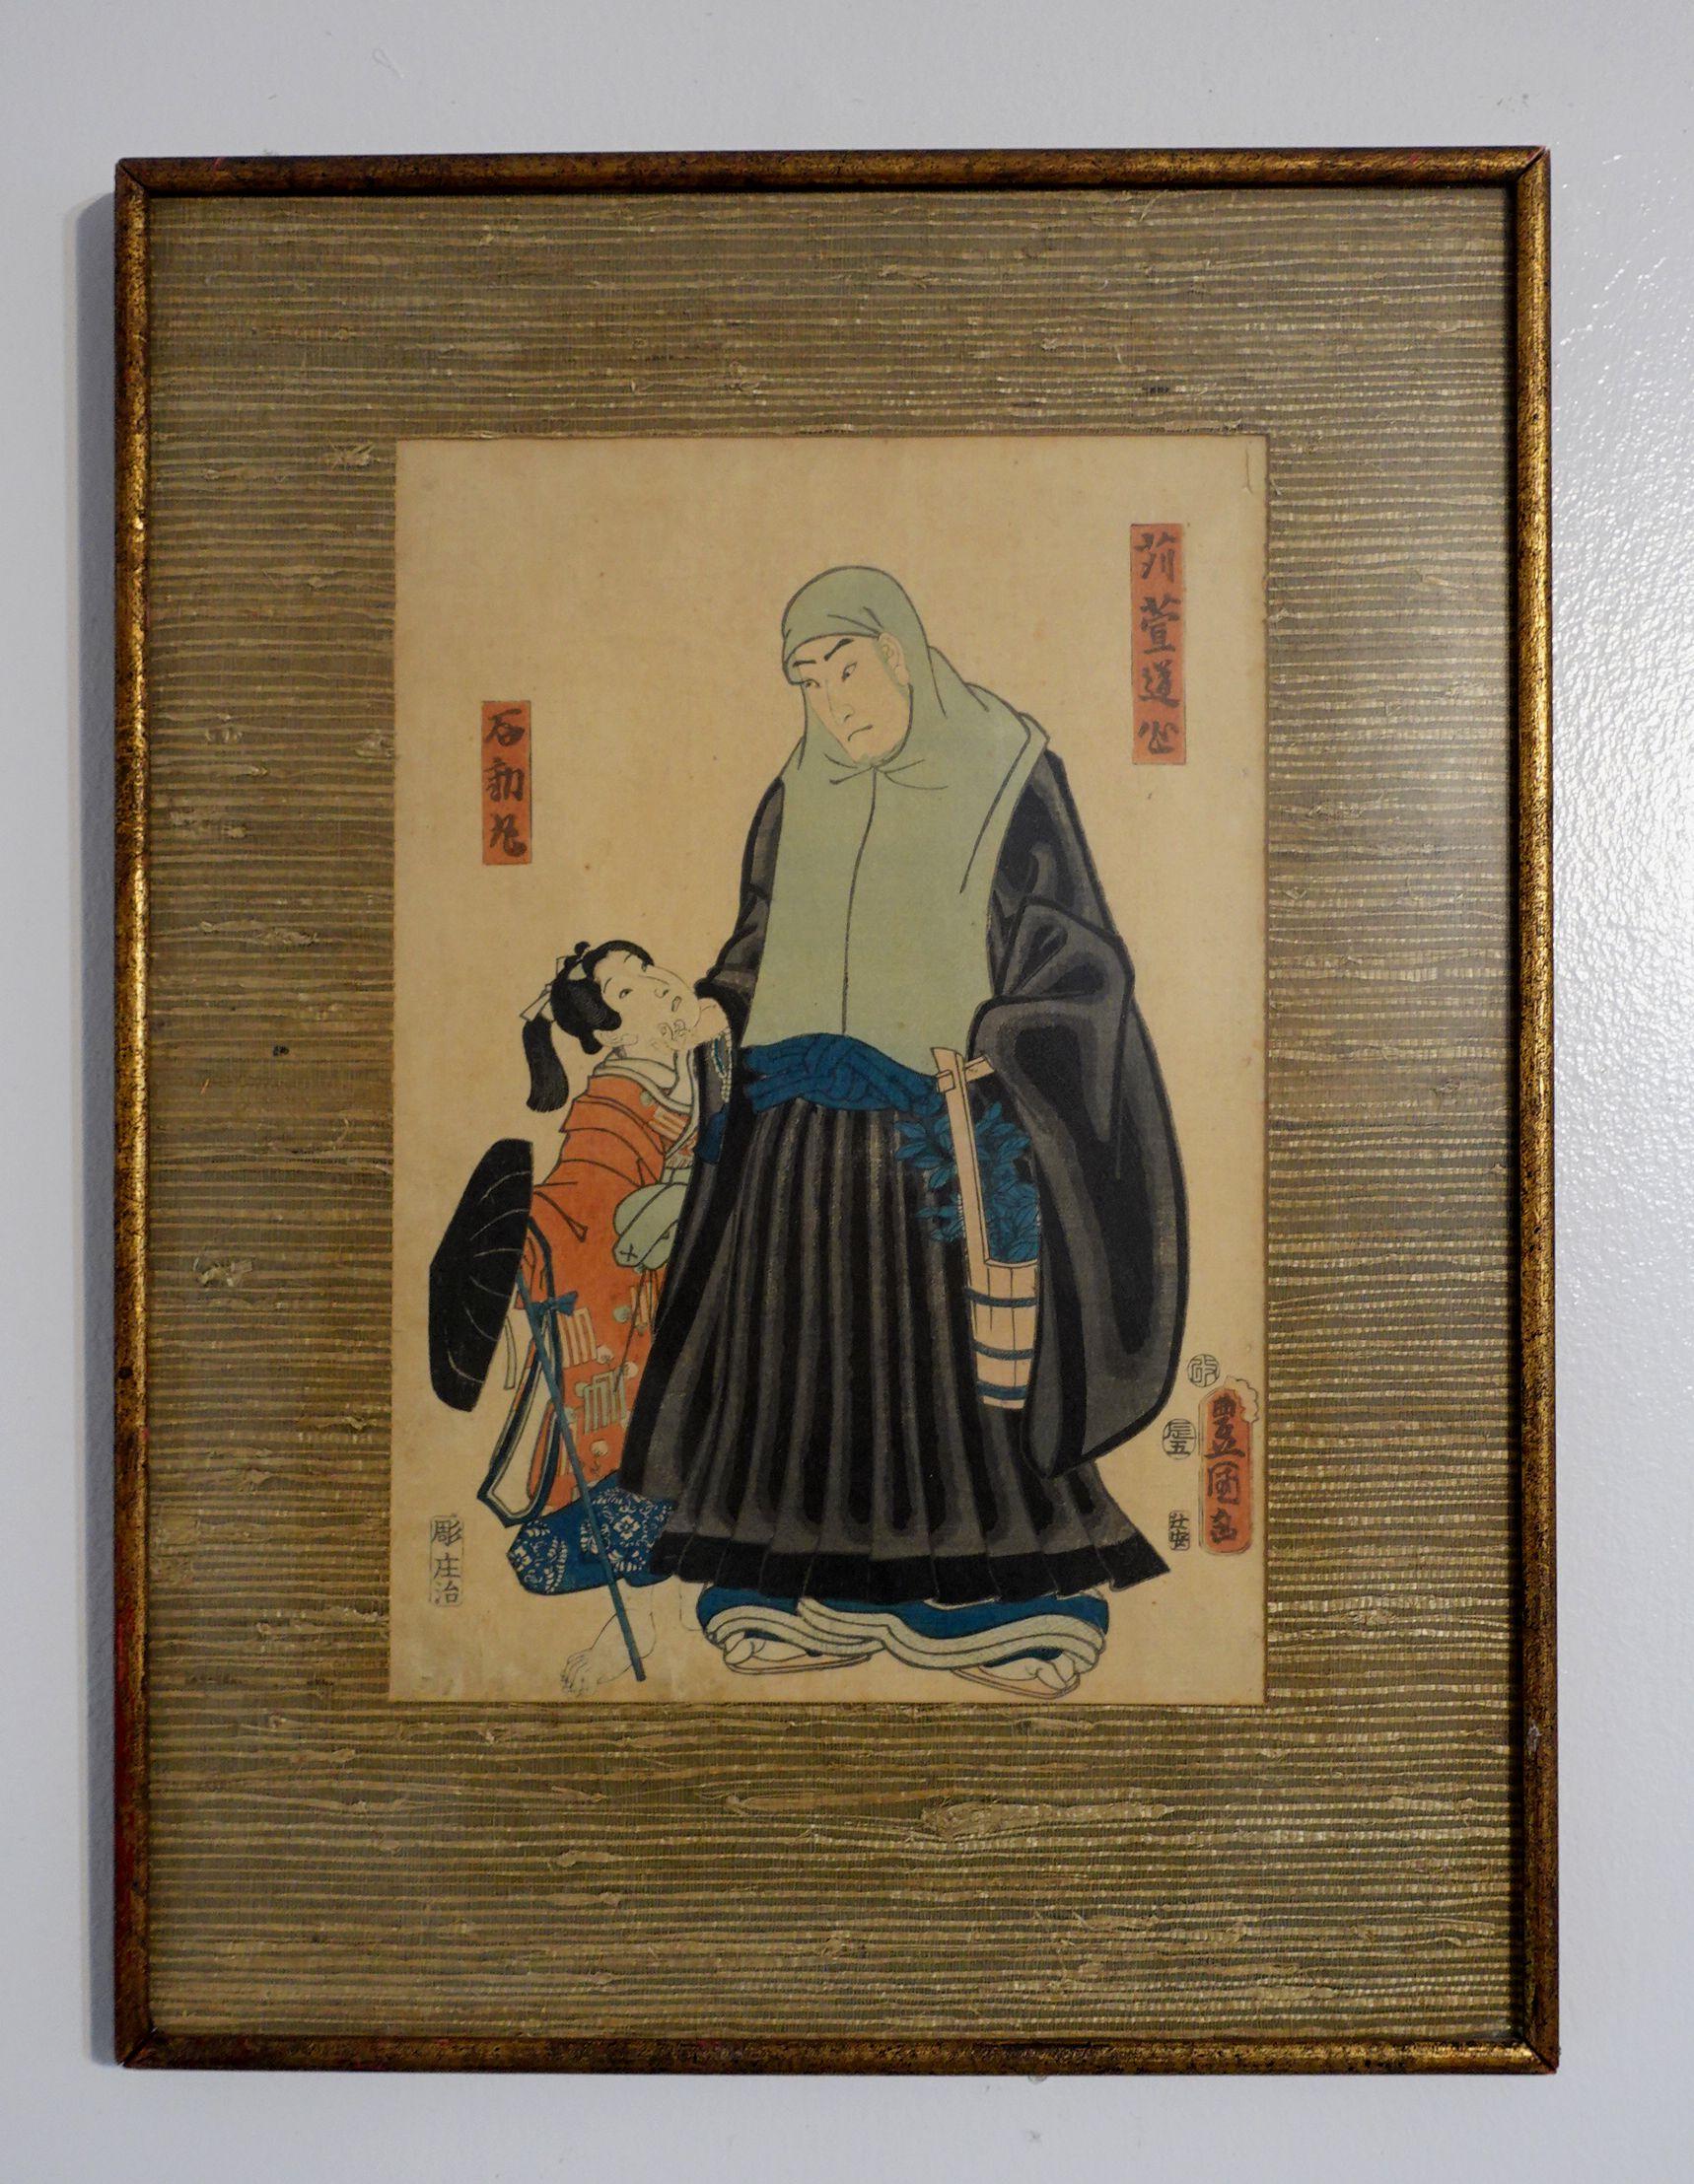 Unusual Japanese Woodblock Print by Utagawa Toyokuni I (1769~1852), depicting a man in his traditional dress and his right hand holding a young girl, original and framed with glass

ABOUT THE ARTIST

Utagawa Kunisada (Japanese: 歌川 国貞; 1786 – 12